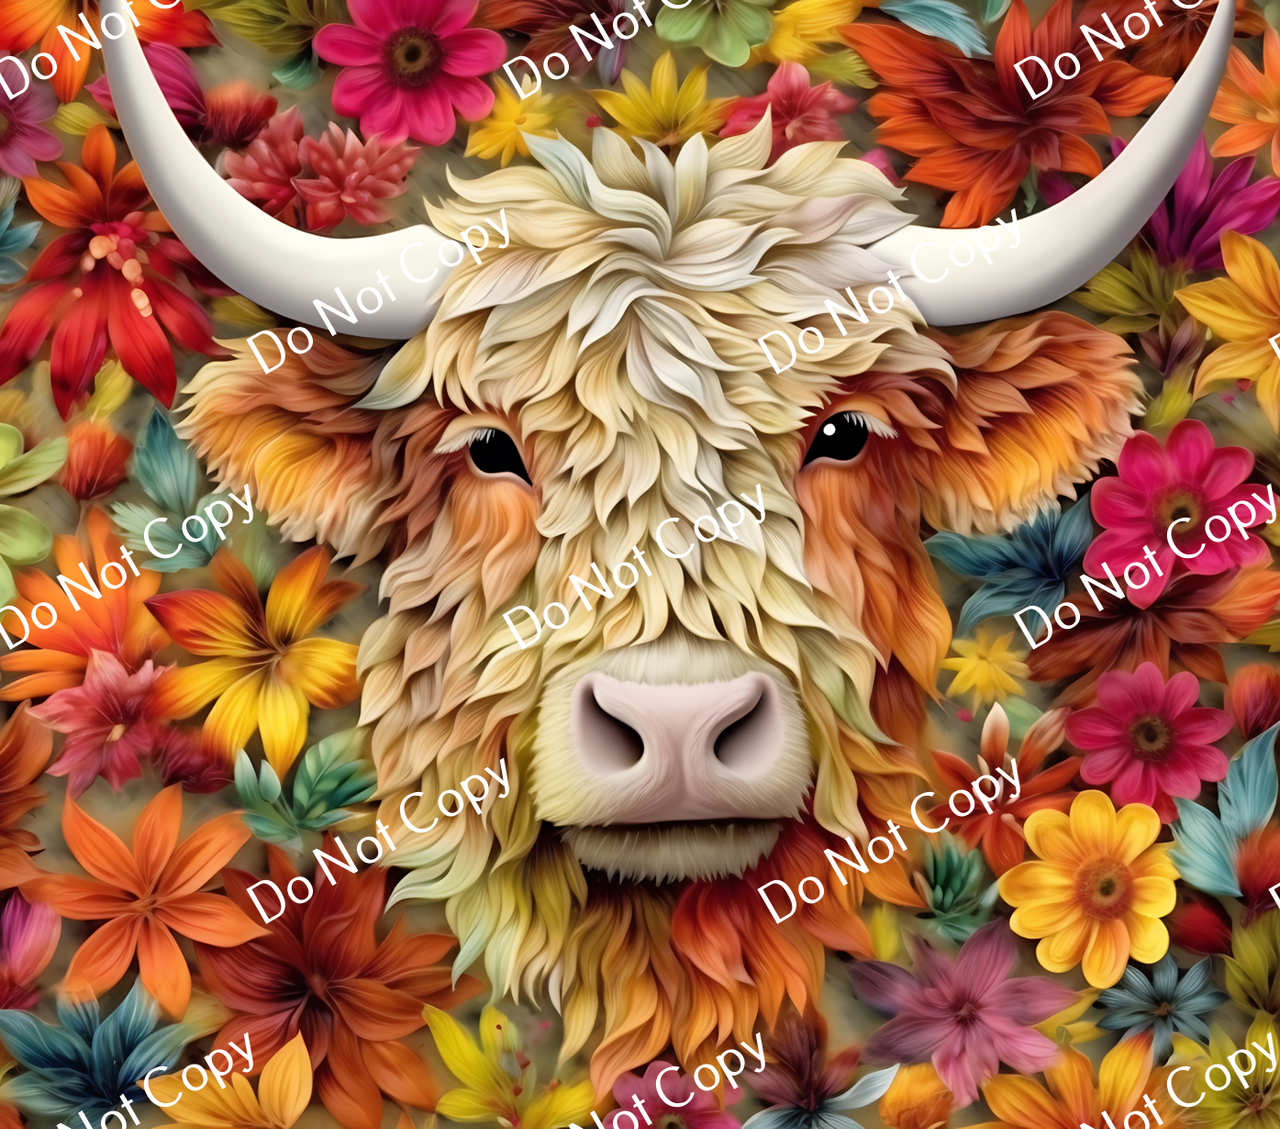 Highland Cow Valentine ready to press sublimation iron on transfer